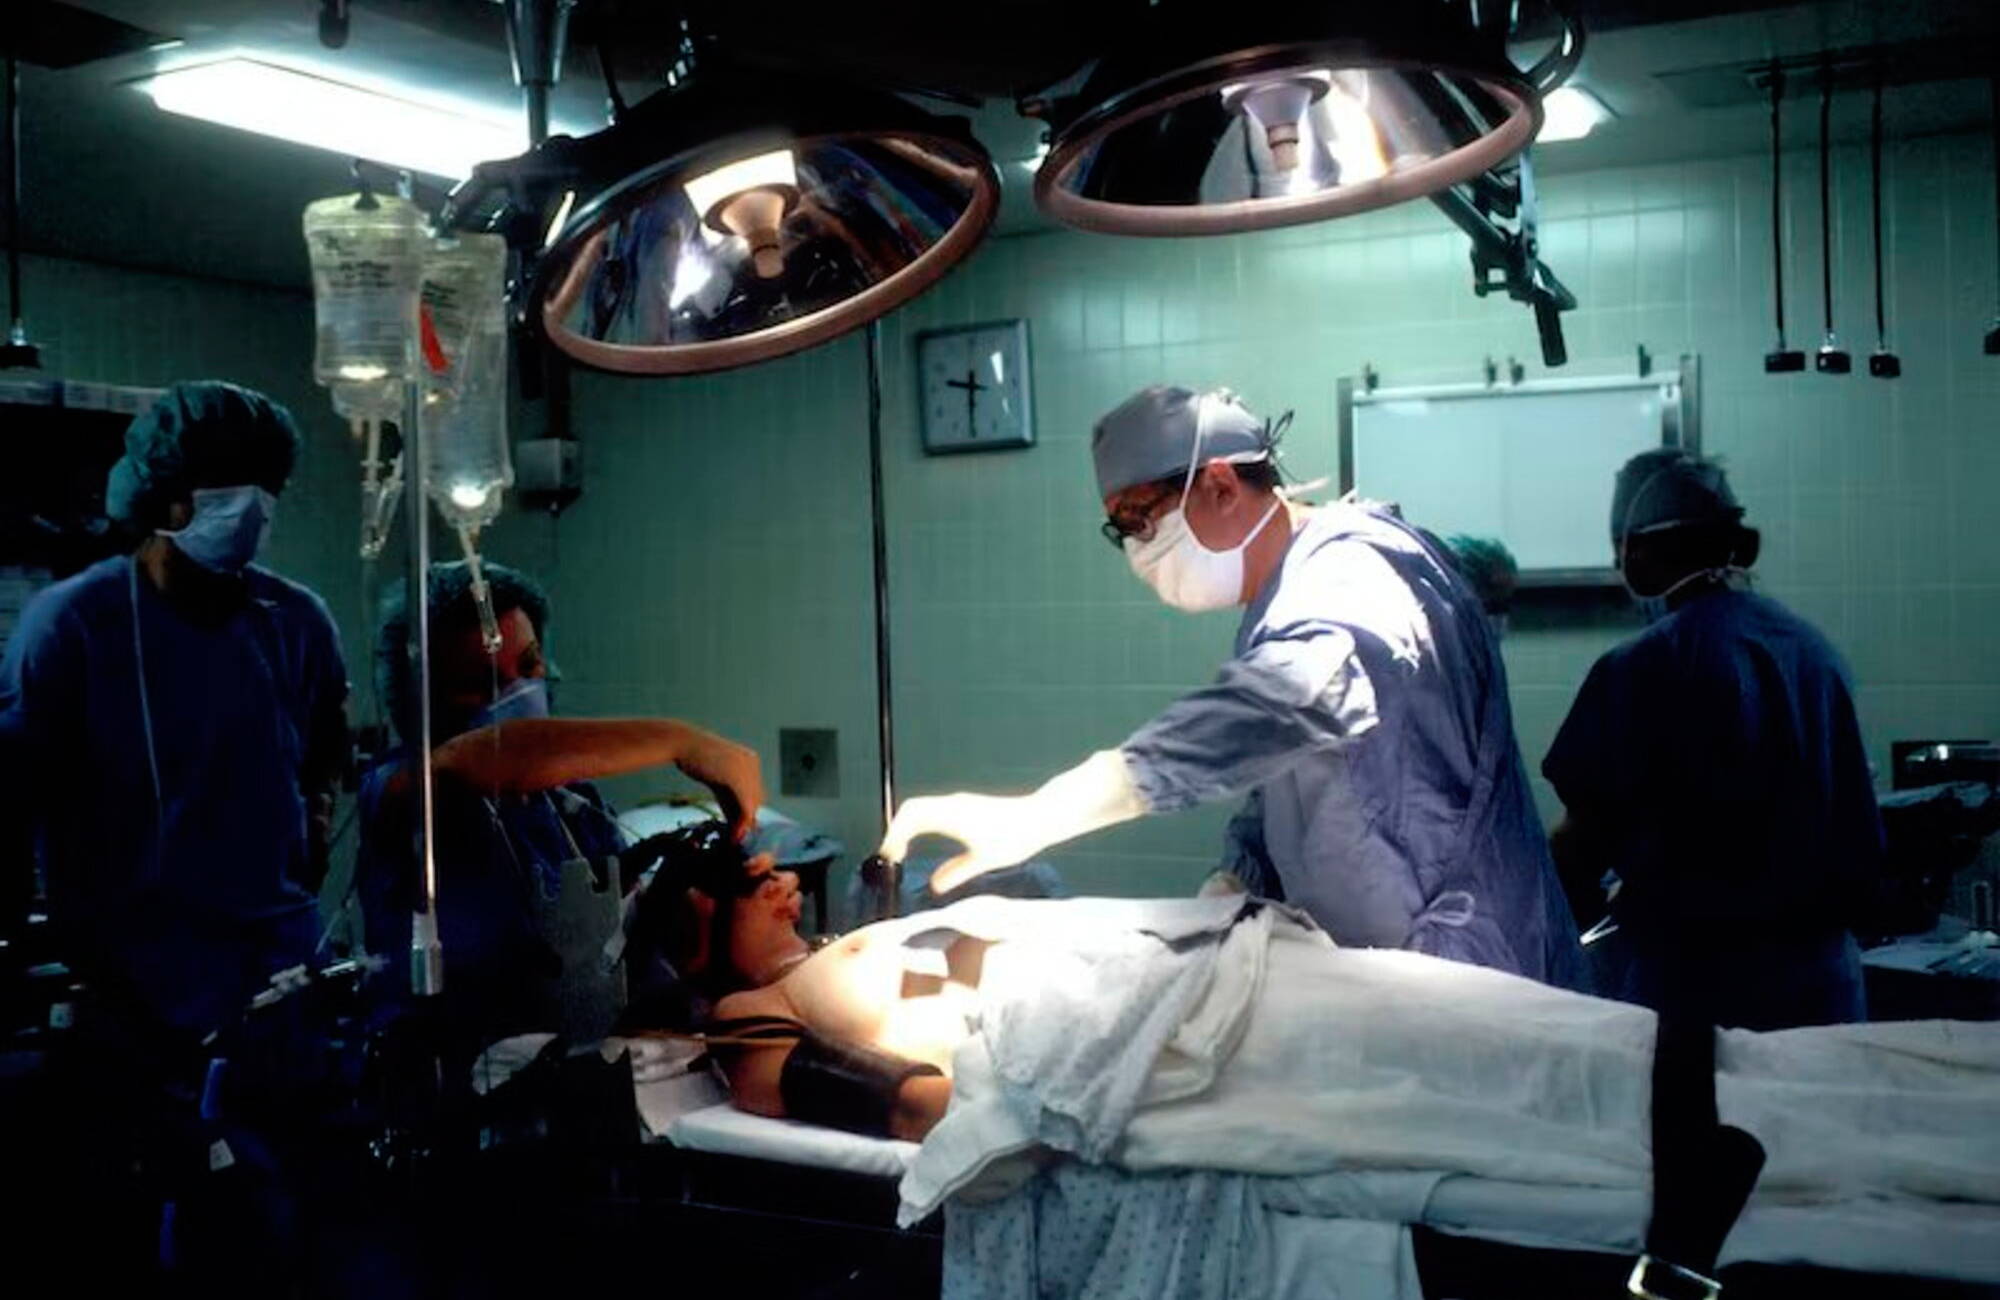  three doctors operate on a sedated person lying on an operating table